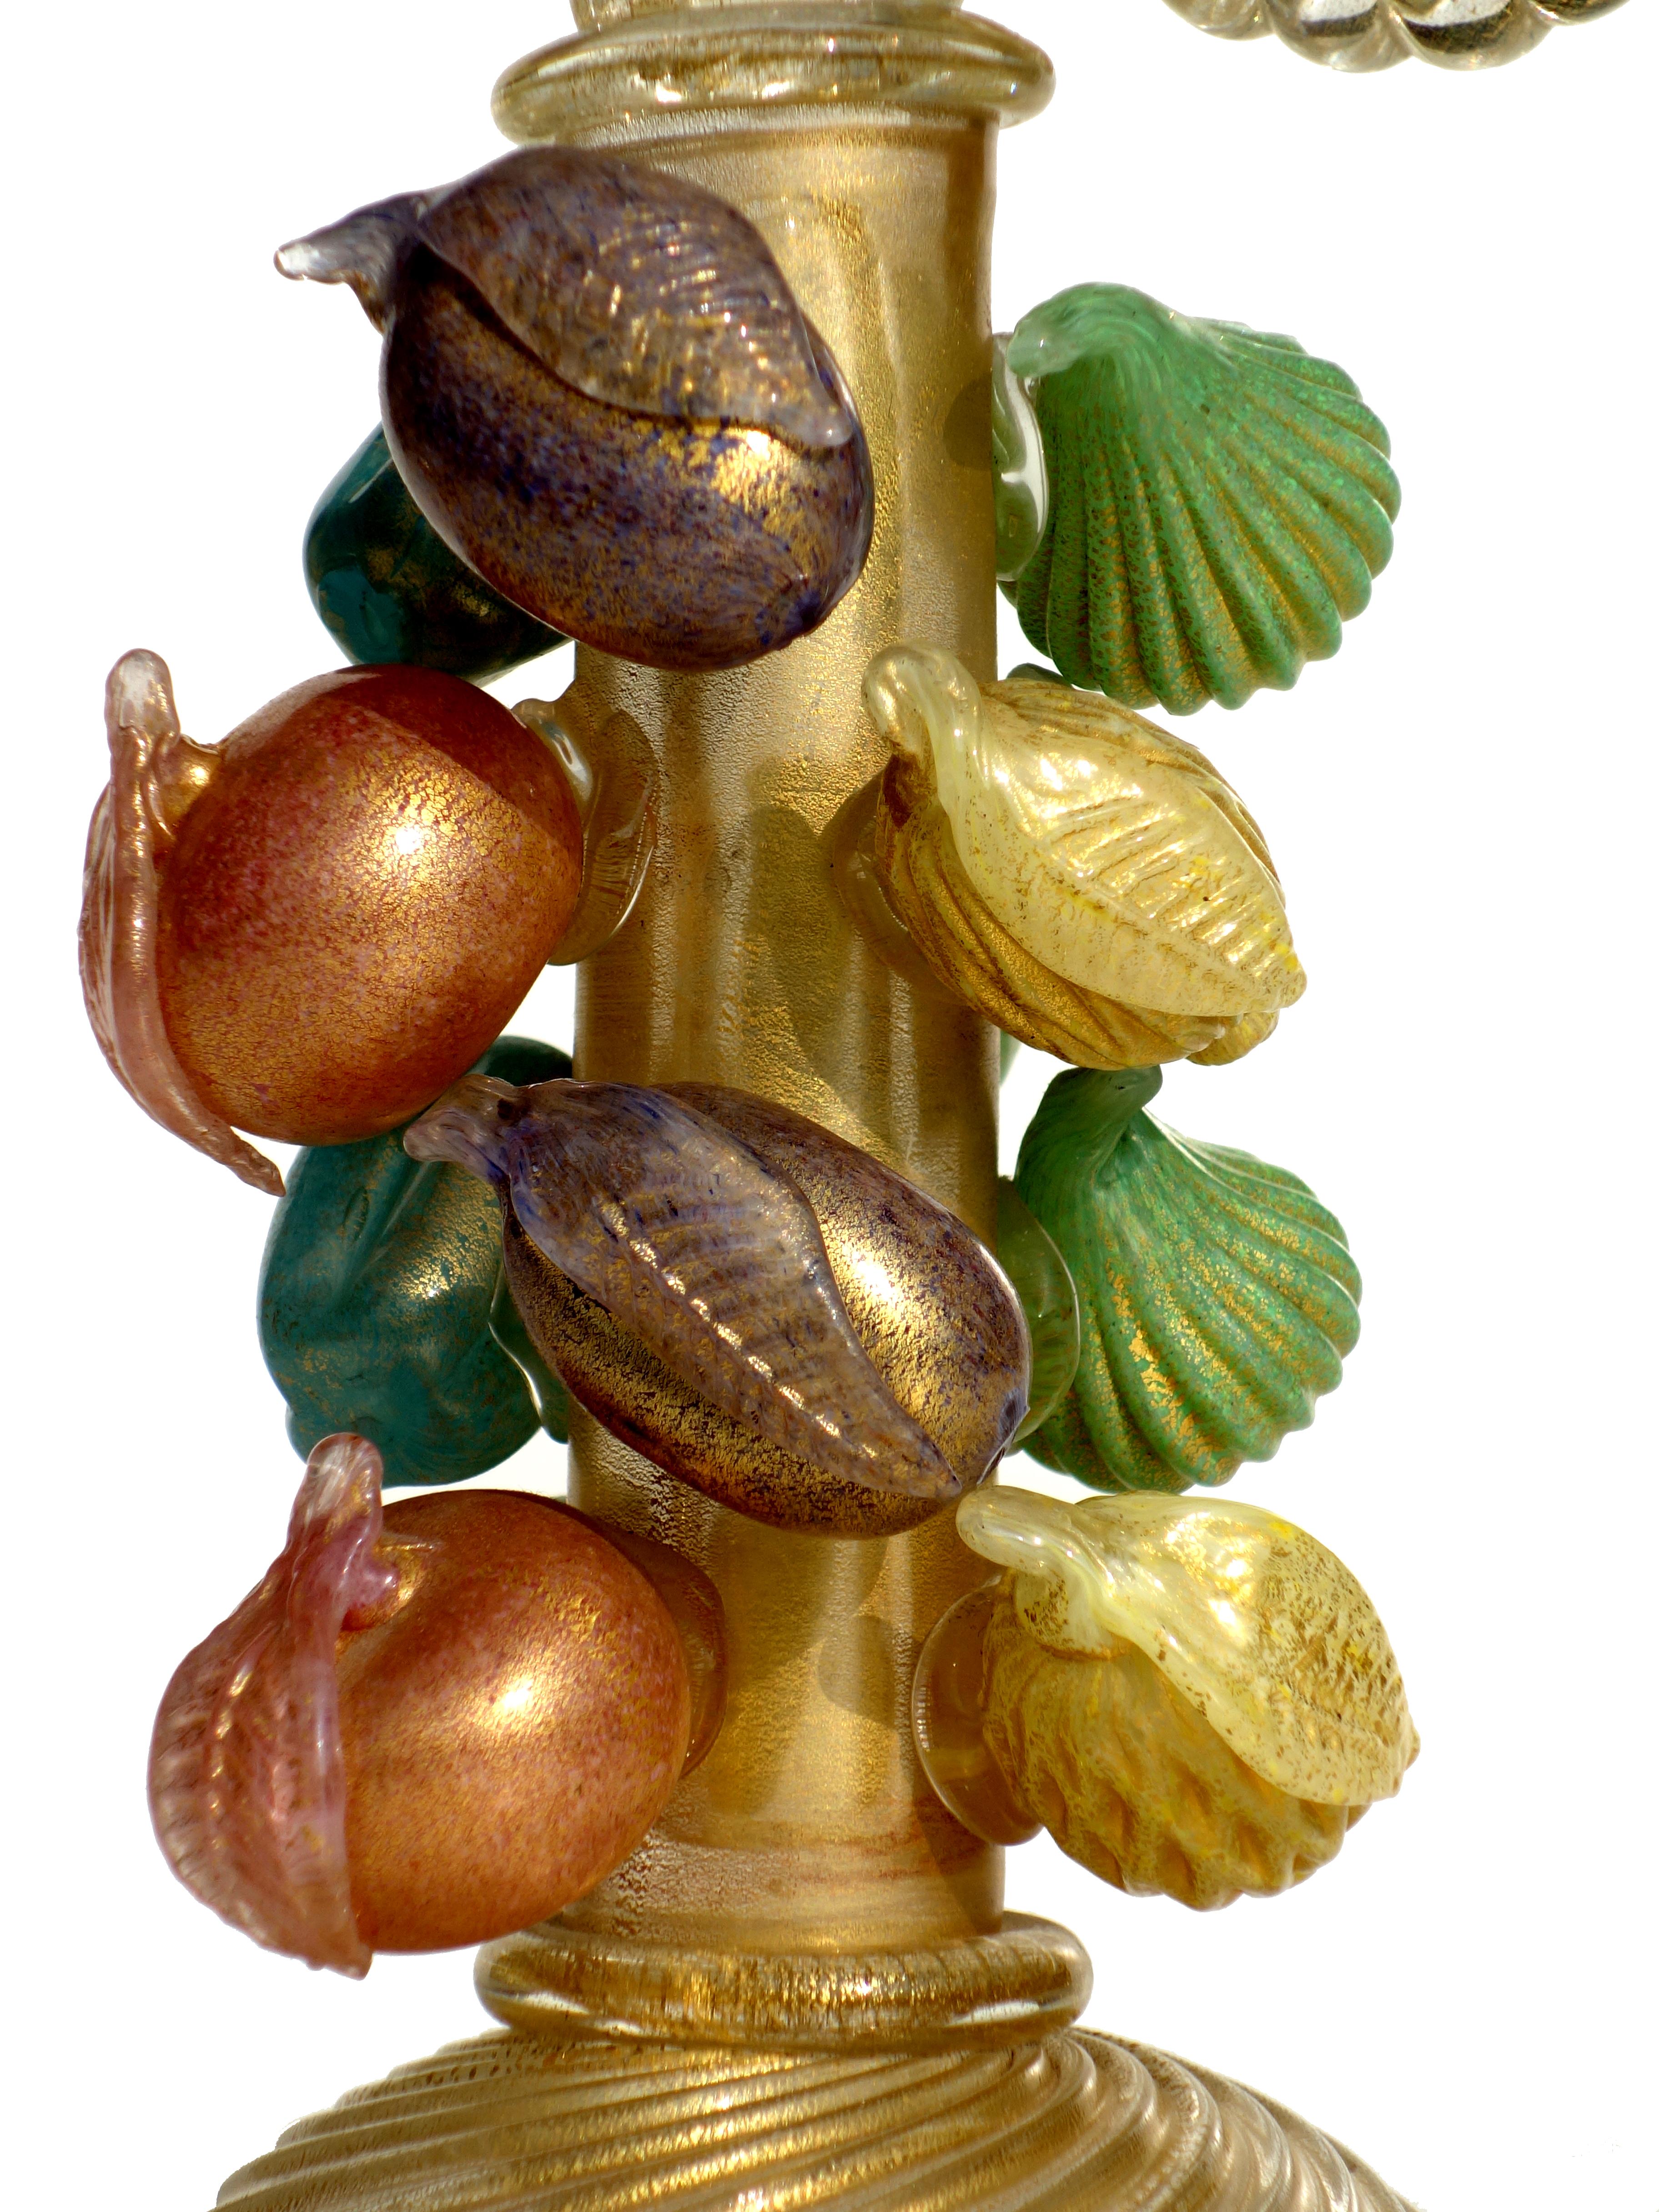 Mid-20th Century 1940s by Ercole Barovier Murano Italian Art Glass Fruit Sculpture Candleholder For Sale